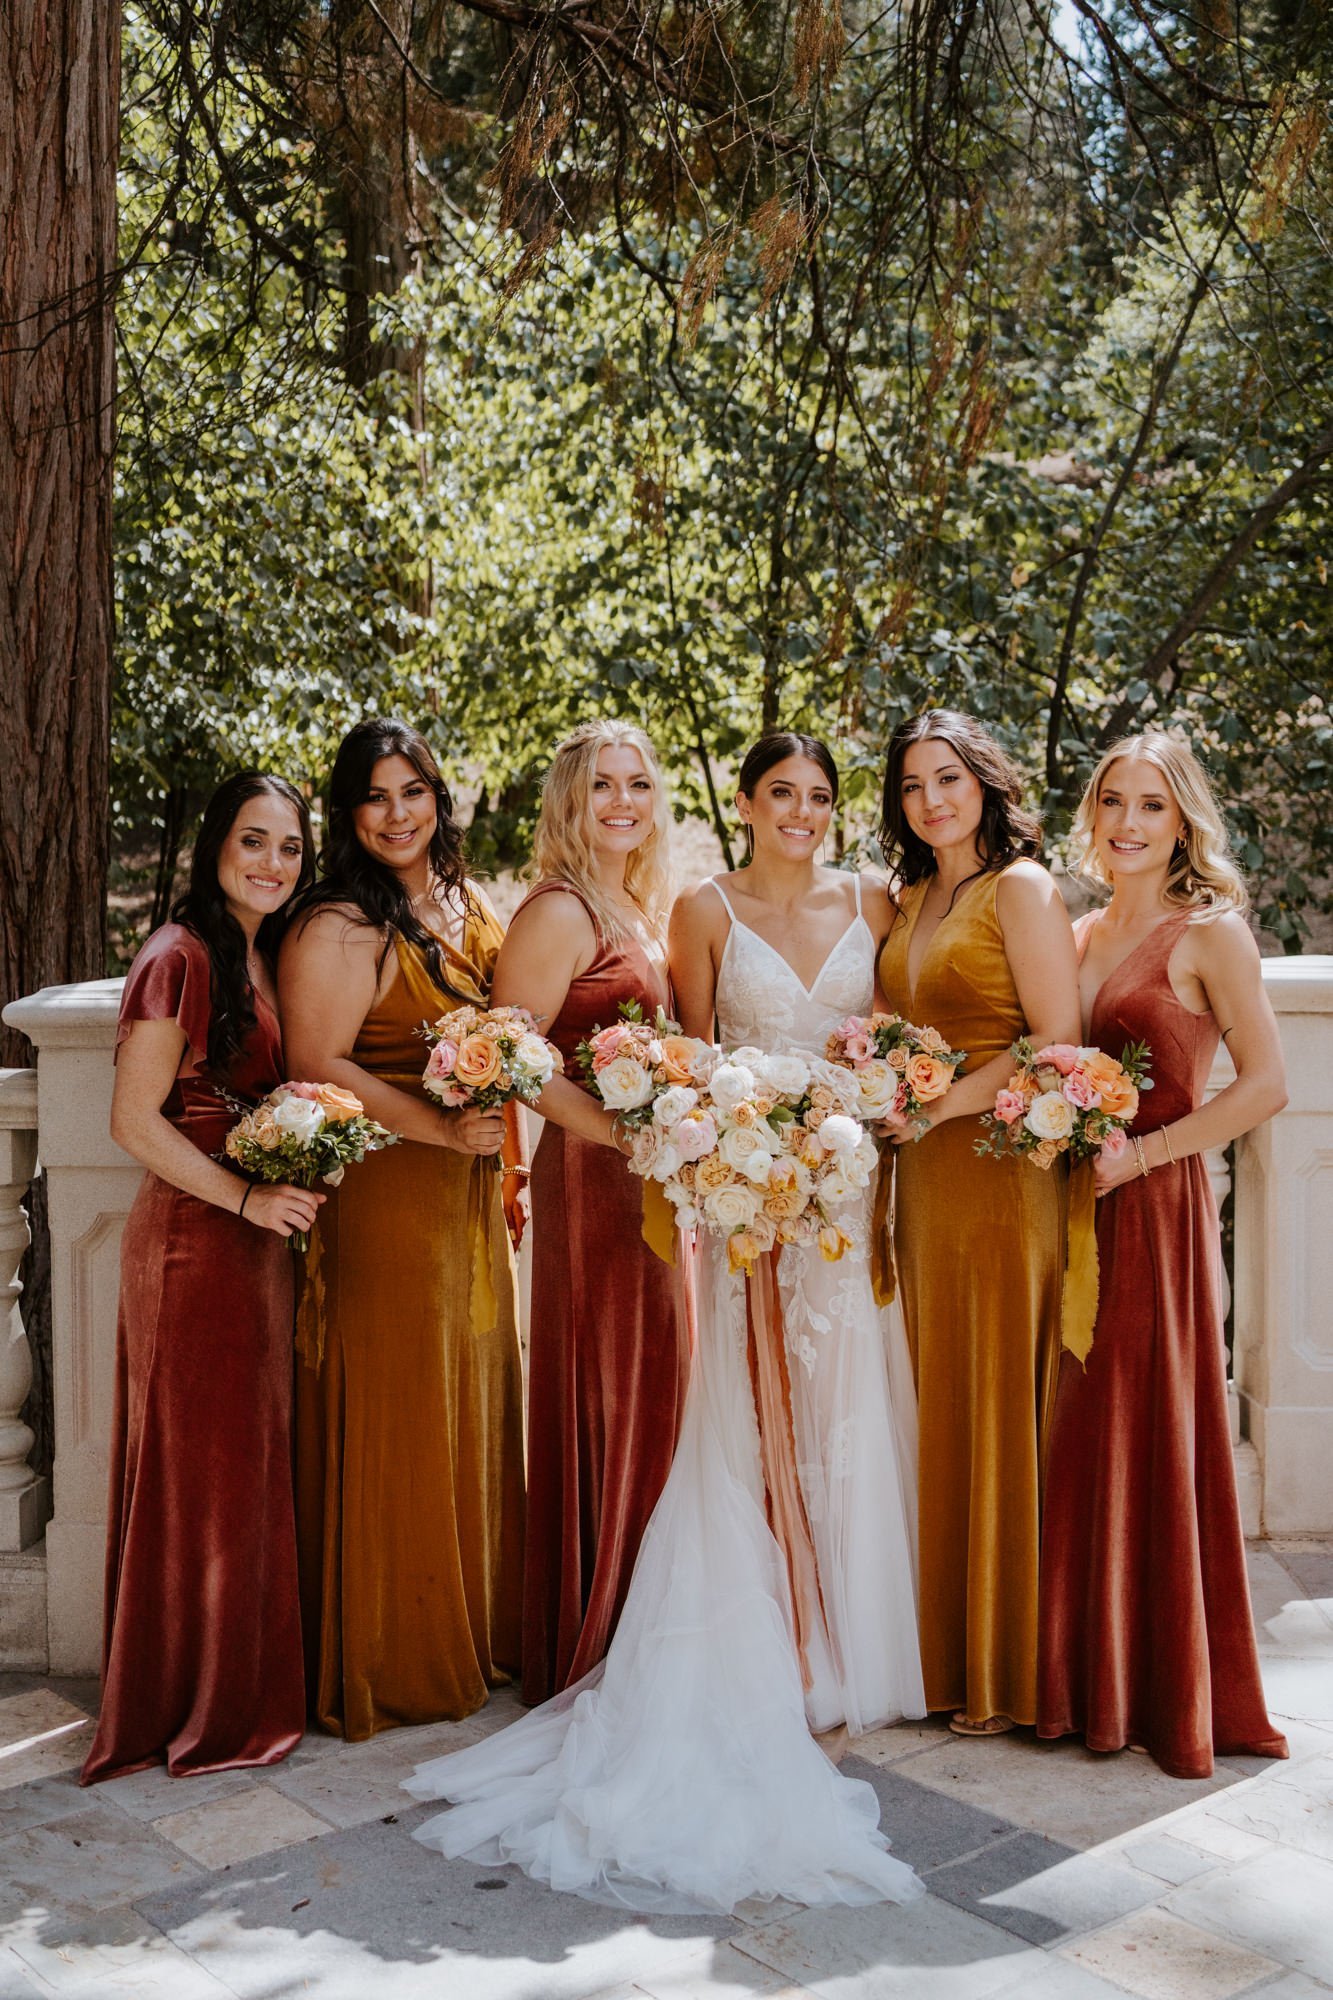 Rose gold and mustard velvet bridesmaid dresses, fall enchanted forest bridesmaid inspo, castle in the forest lake arrowhead airbnb wedding, photo by Tida Svy